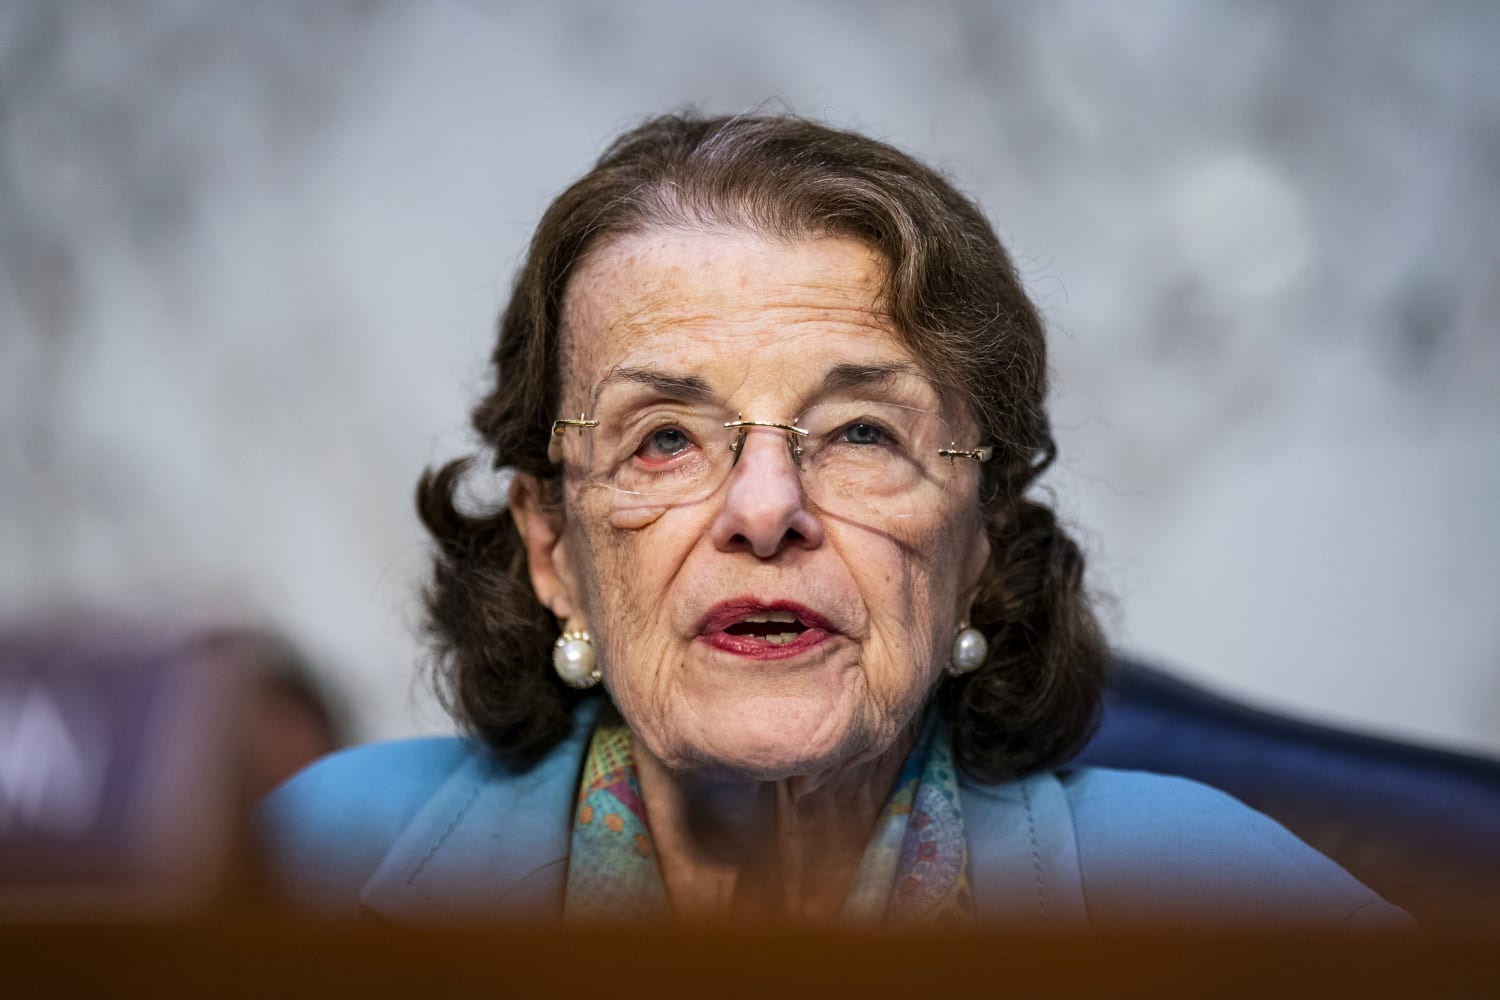 Dianne Feinstein went to the hospital after a ‘minor fall’ at home, spokesperson says